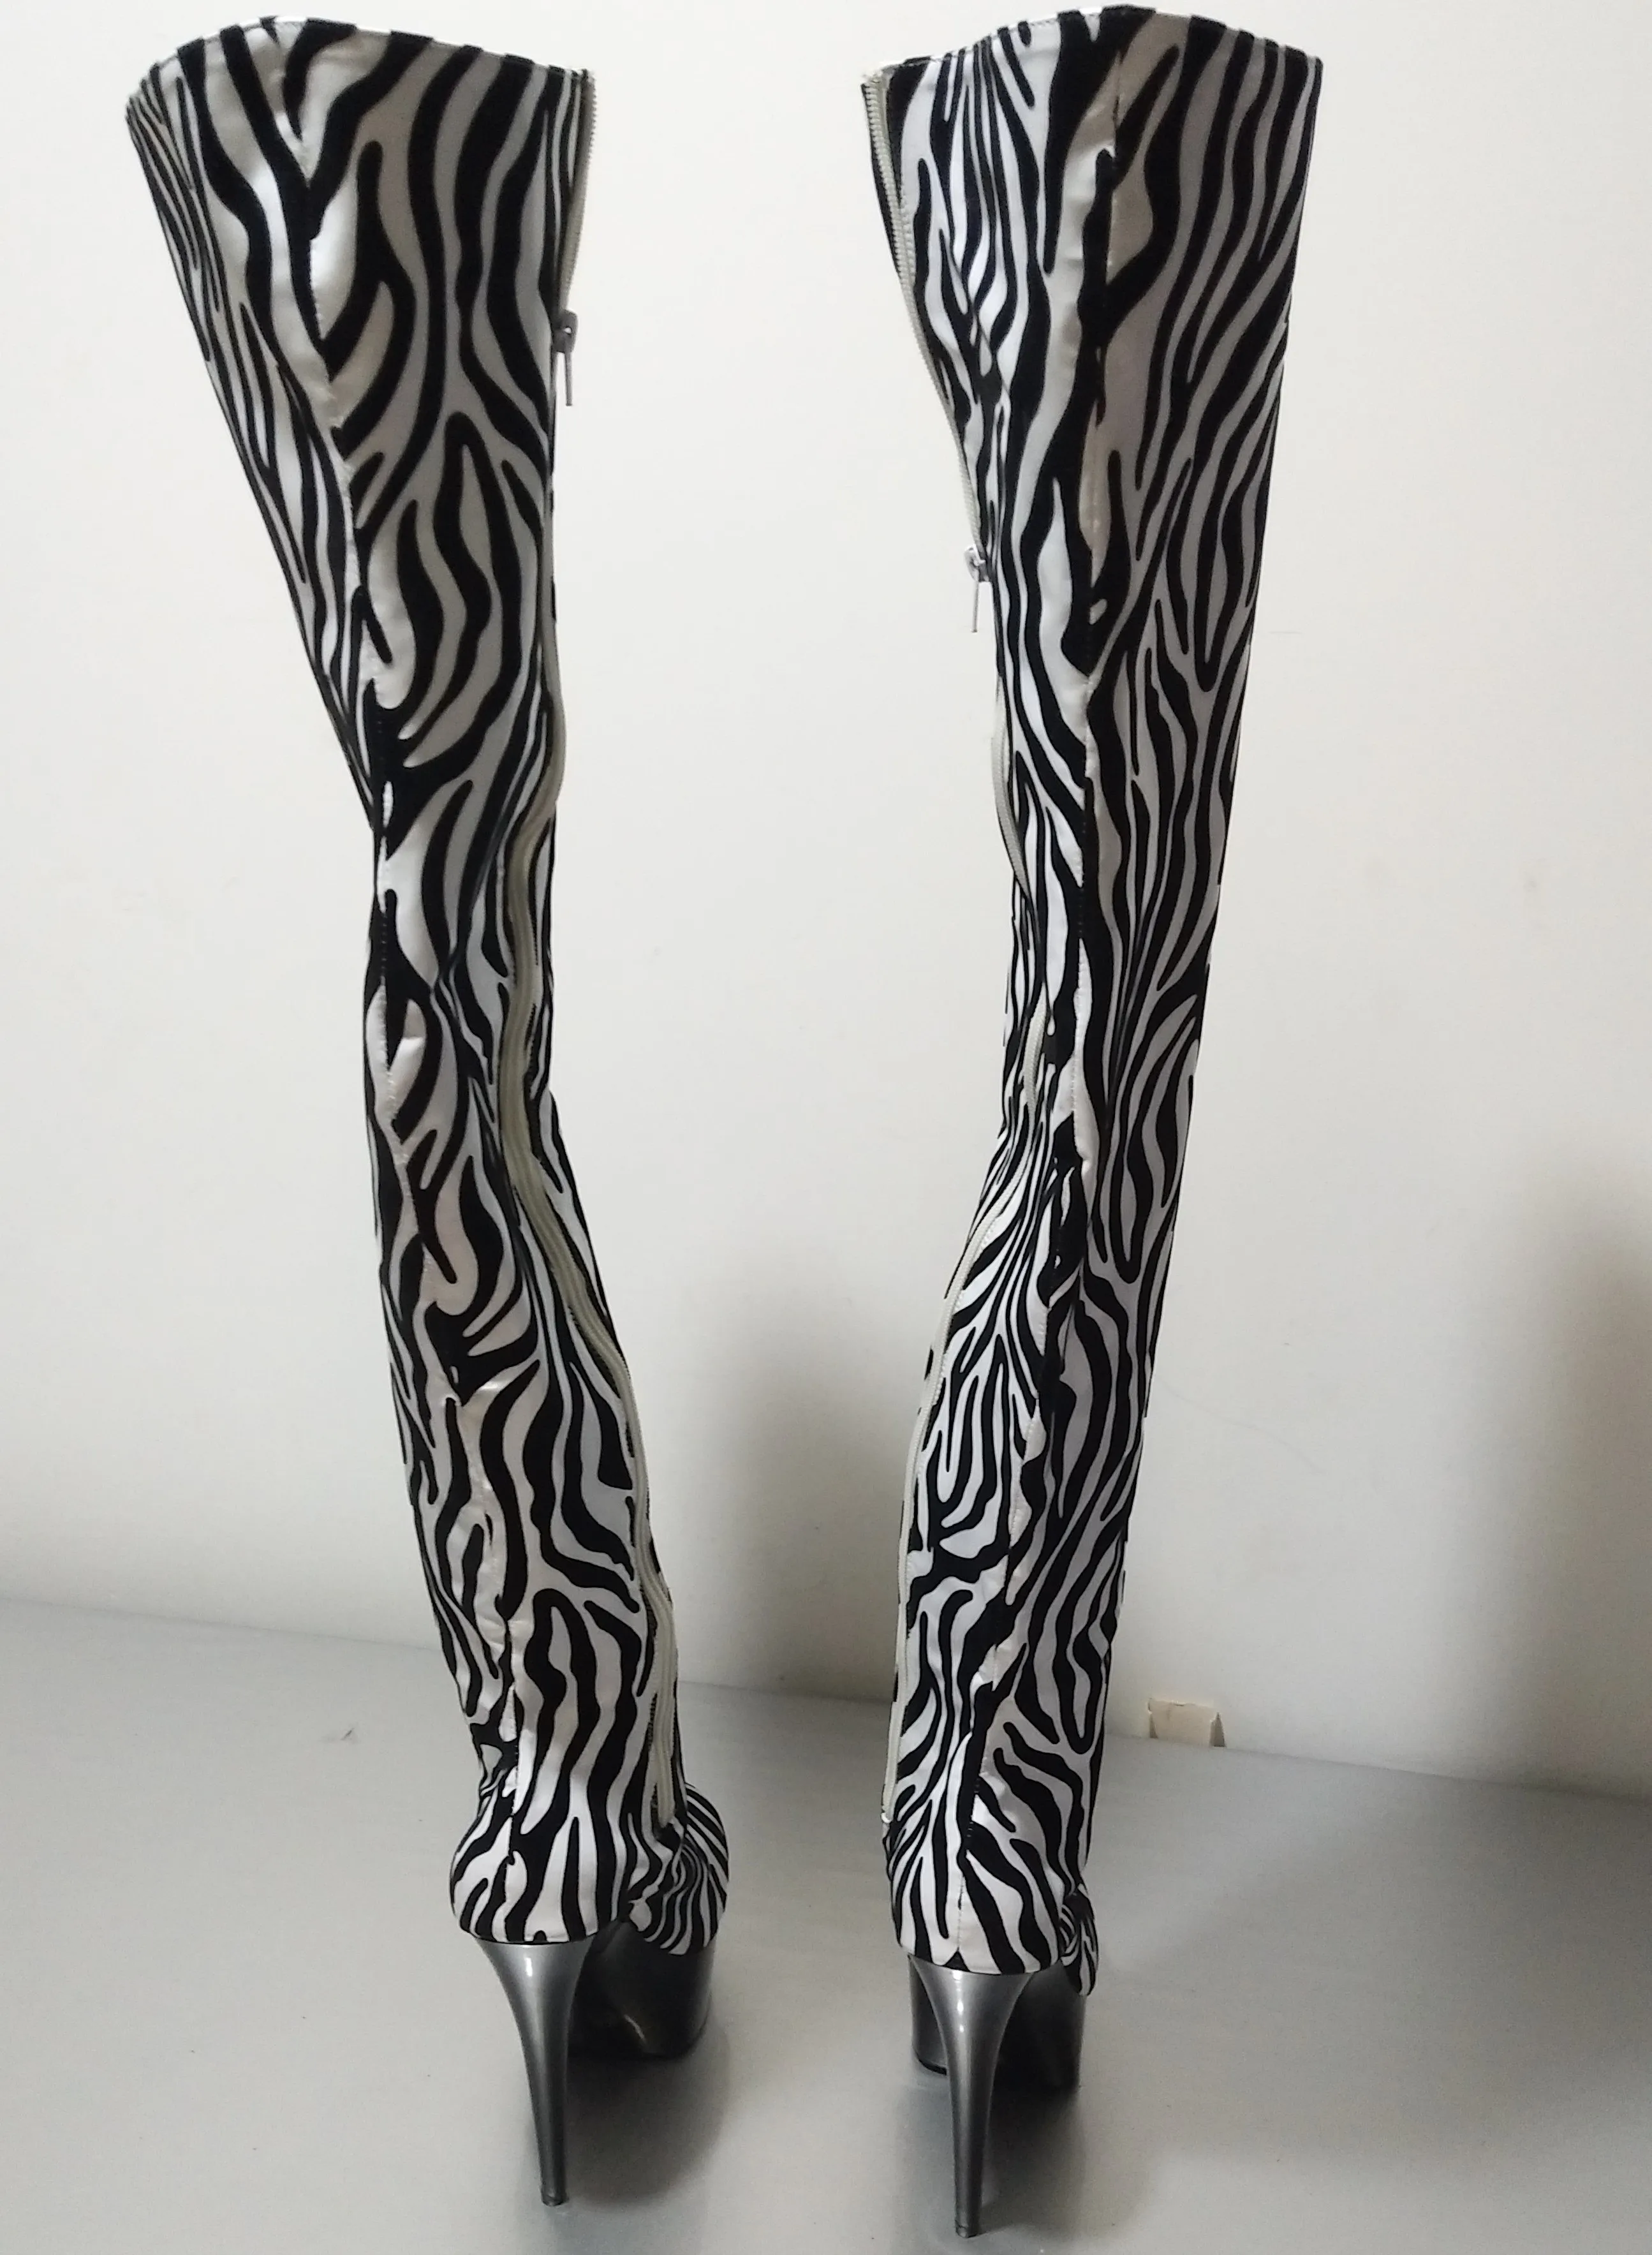 

15CM Stylish Zebra Color Material High-Heeled Shoes, Model Pole Dancing Performance Nightclub 6 Inches Sexy dance shoes